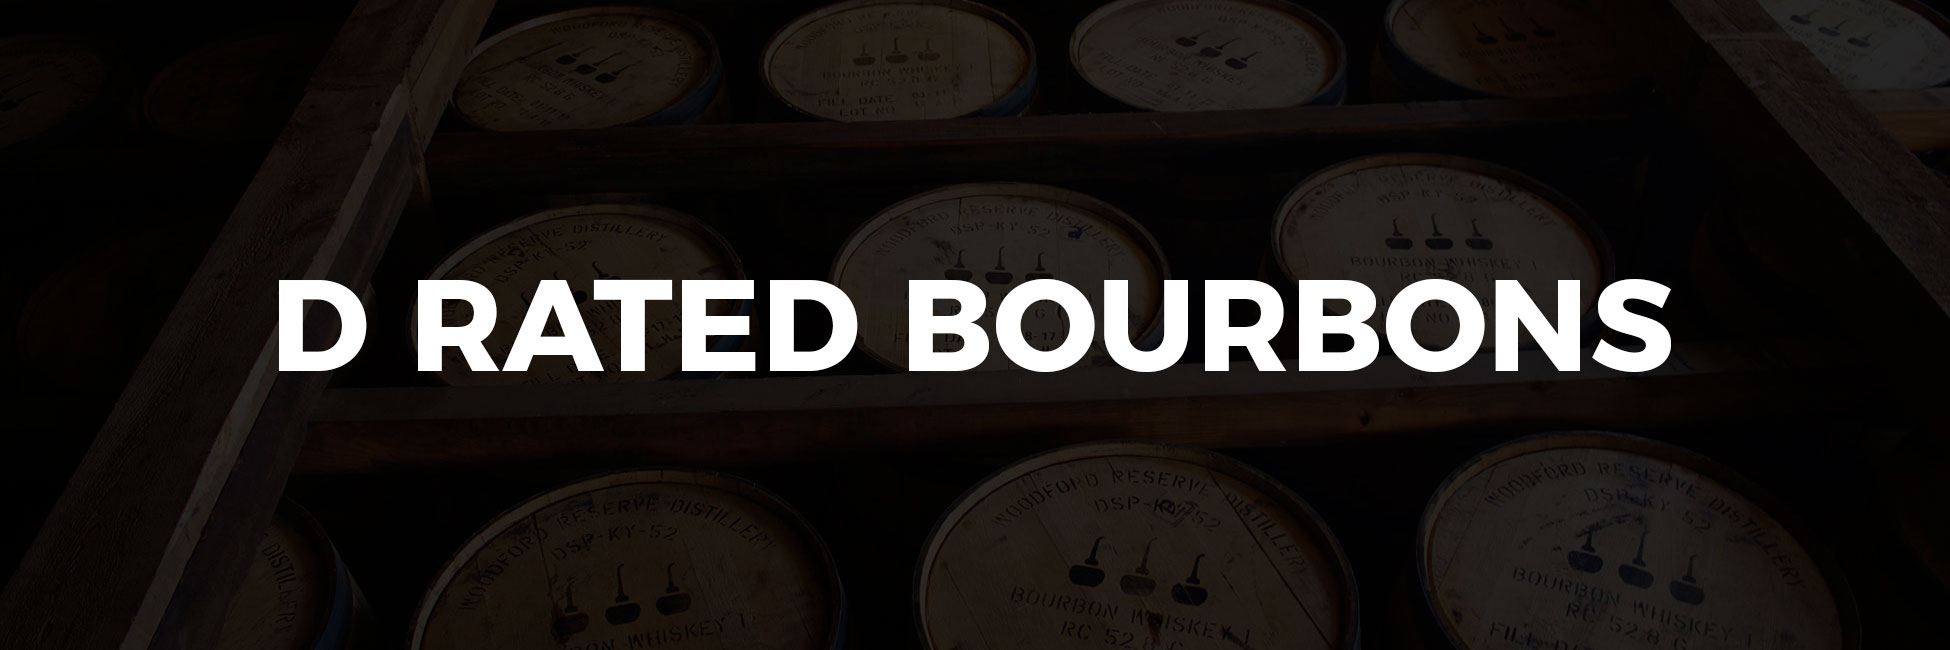 D Rated Bourbons